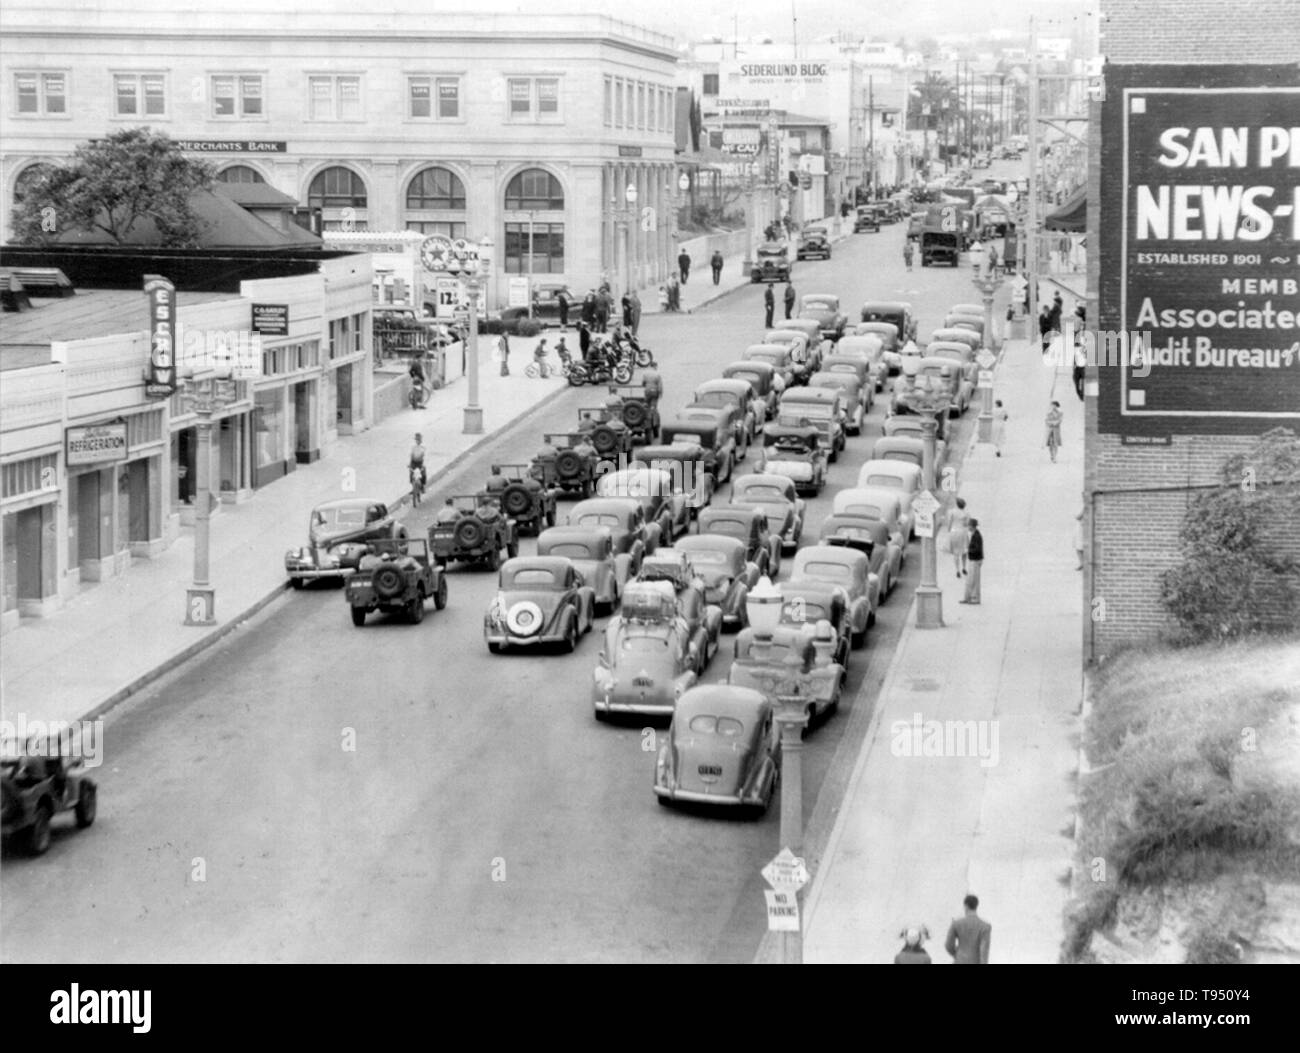 Entitled: 'Caravan of cars, with many military escort vehicles, W. 7th St. & S. Pacific Avenue.' The internment of Japanese-Americans during WWII was the forced relocation and incarceration in camps of 110,000-120,000 people of Japanese ancestry (62% of the internees were US citizens) ordered by President Roosevelt shortly after Japan's attack on Pearl Harbor. Japanese-Americans were incarcerated based on local population concentrations and regional politics. Stock Photo